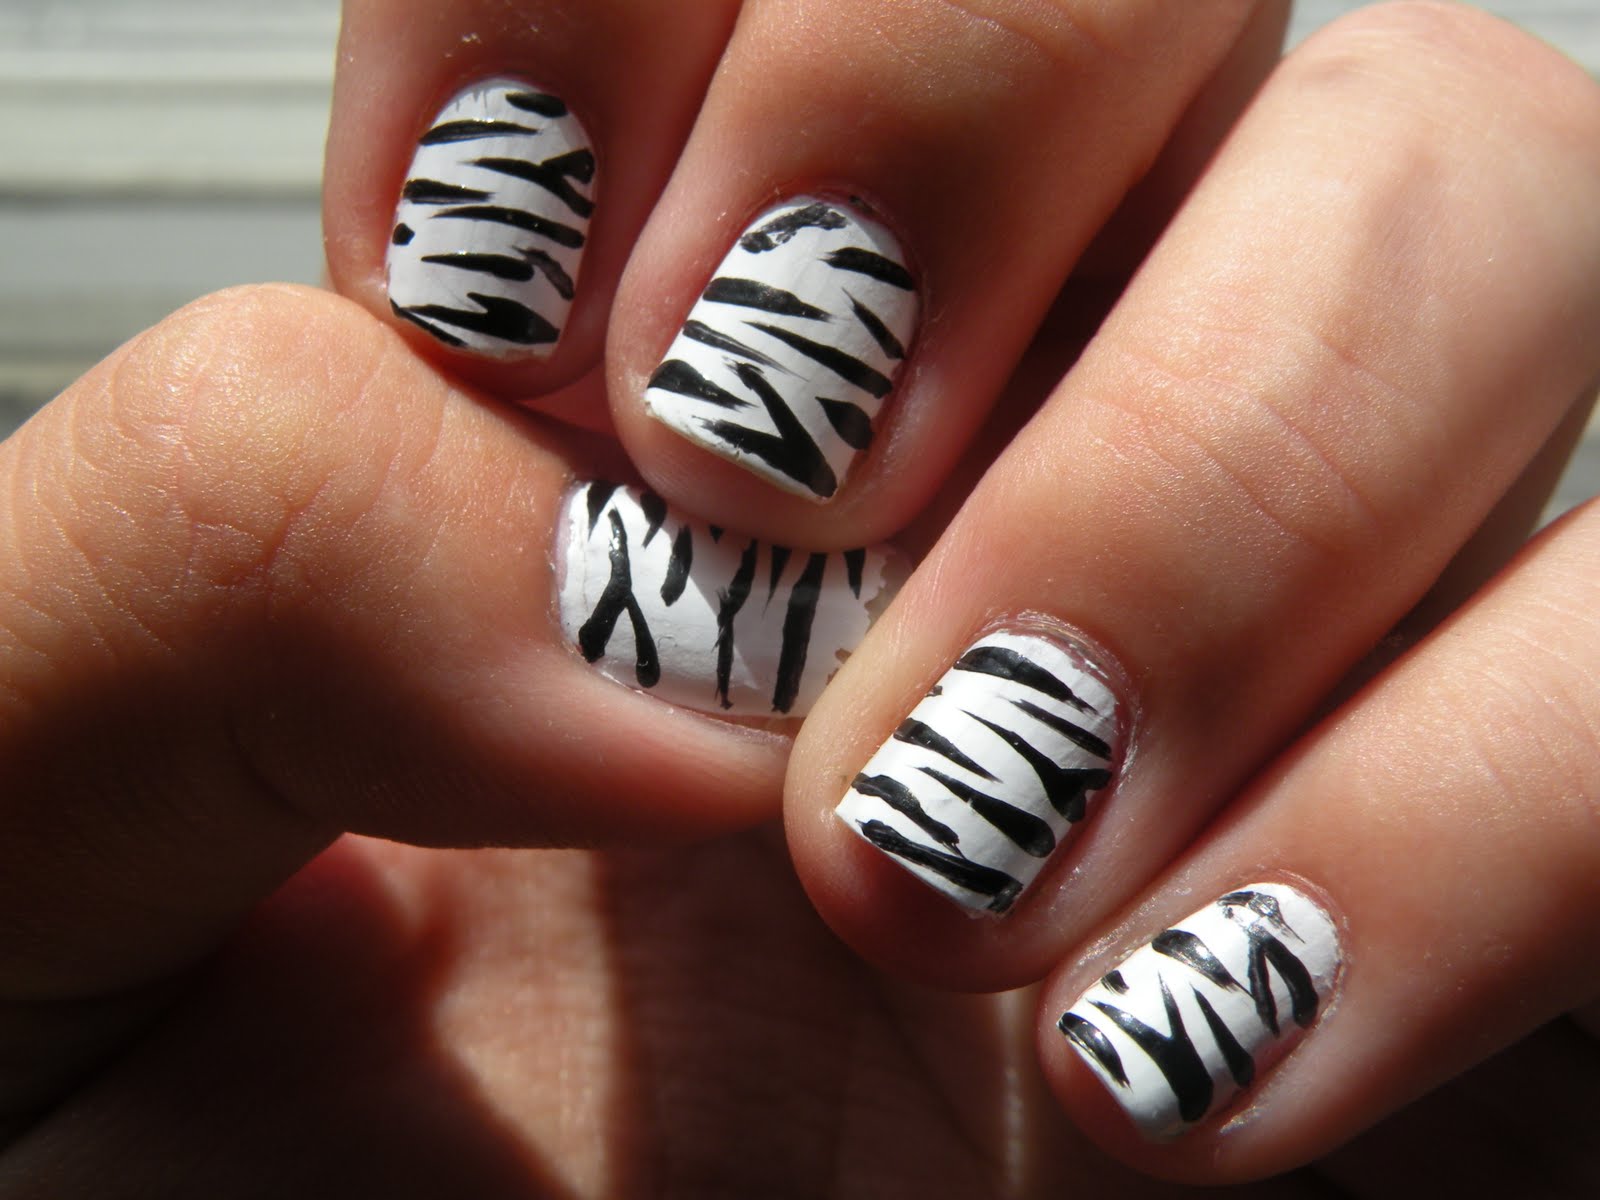 10. "Edgy Animal Print Nail Art Designs for a Wild and Bold Look" - wide 4